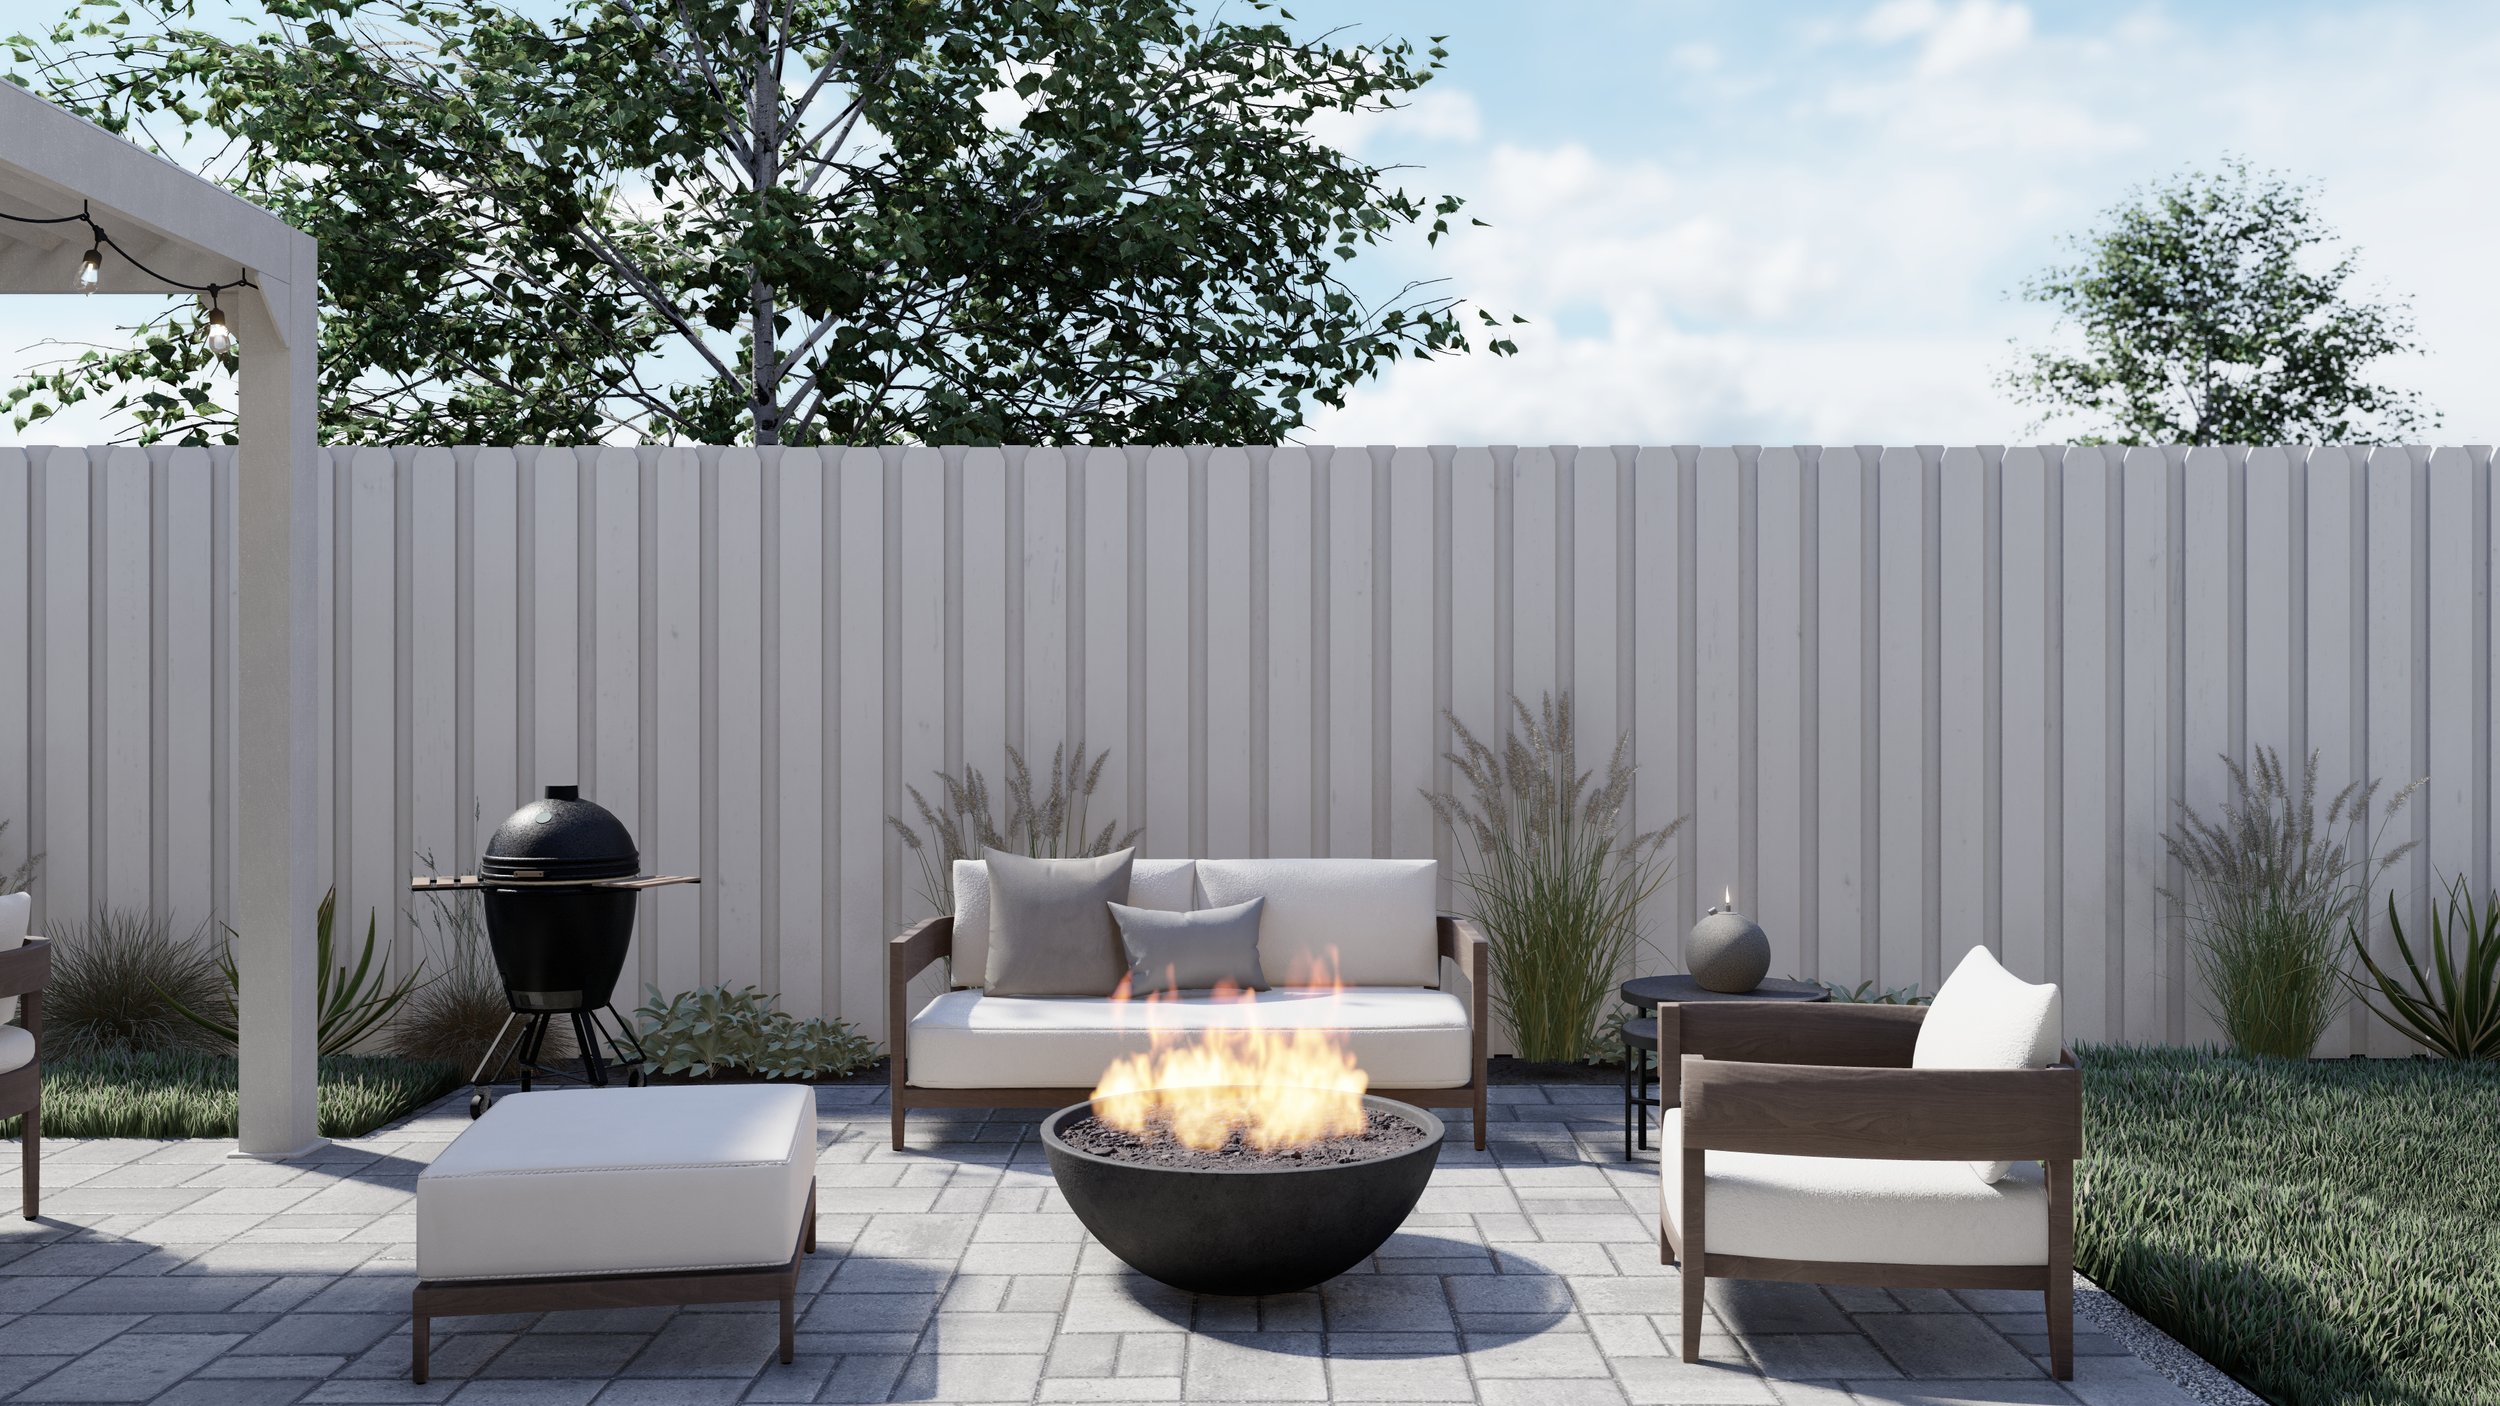 Backyard design render with Balmain teak sofa on paver patio with fire pit and lounge chair.